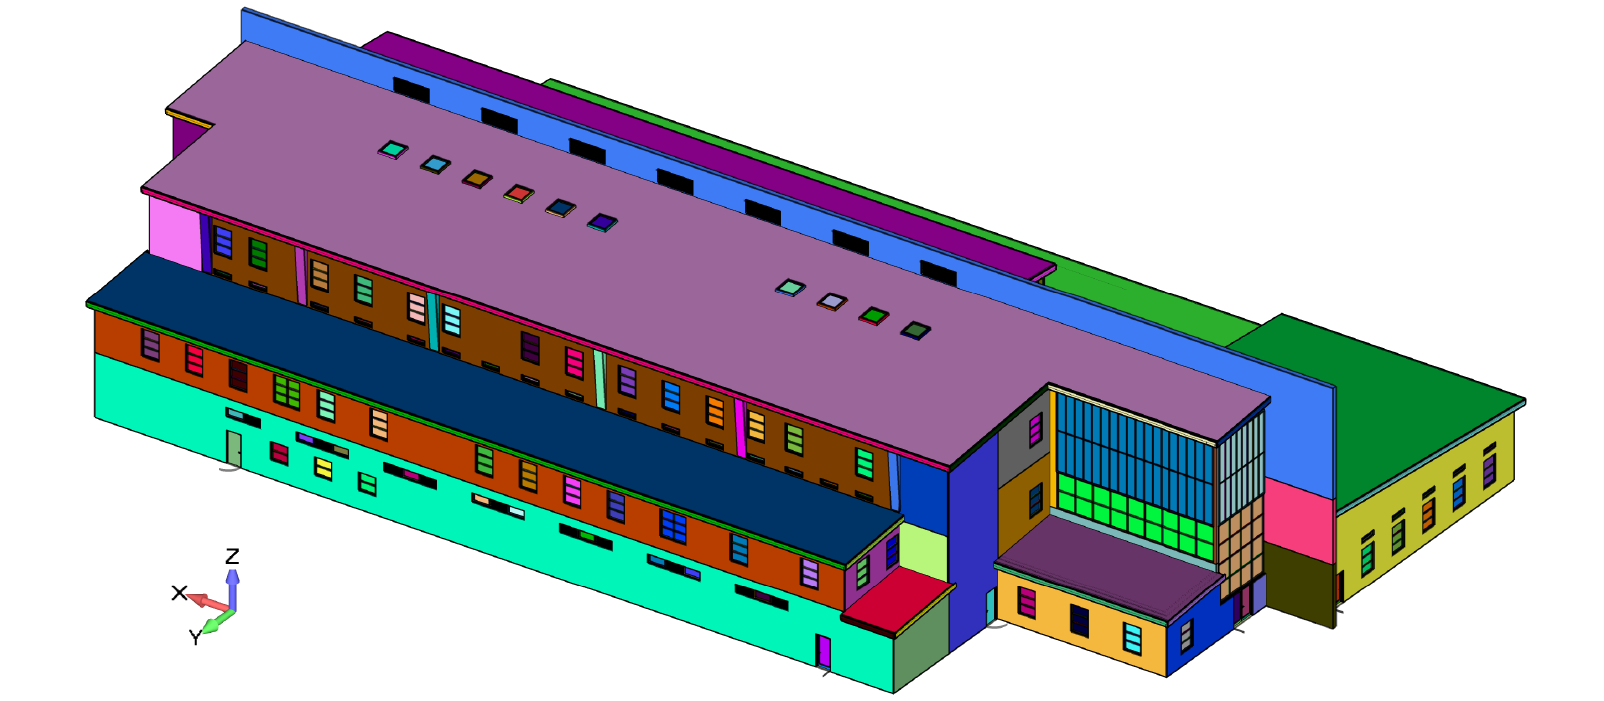 CAD Geometry of the LEED designed multipurpose building used as the starting point for the CFD simulation model